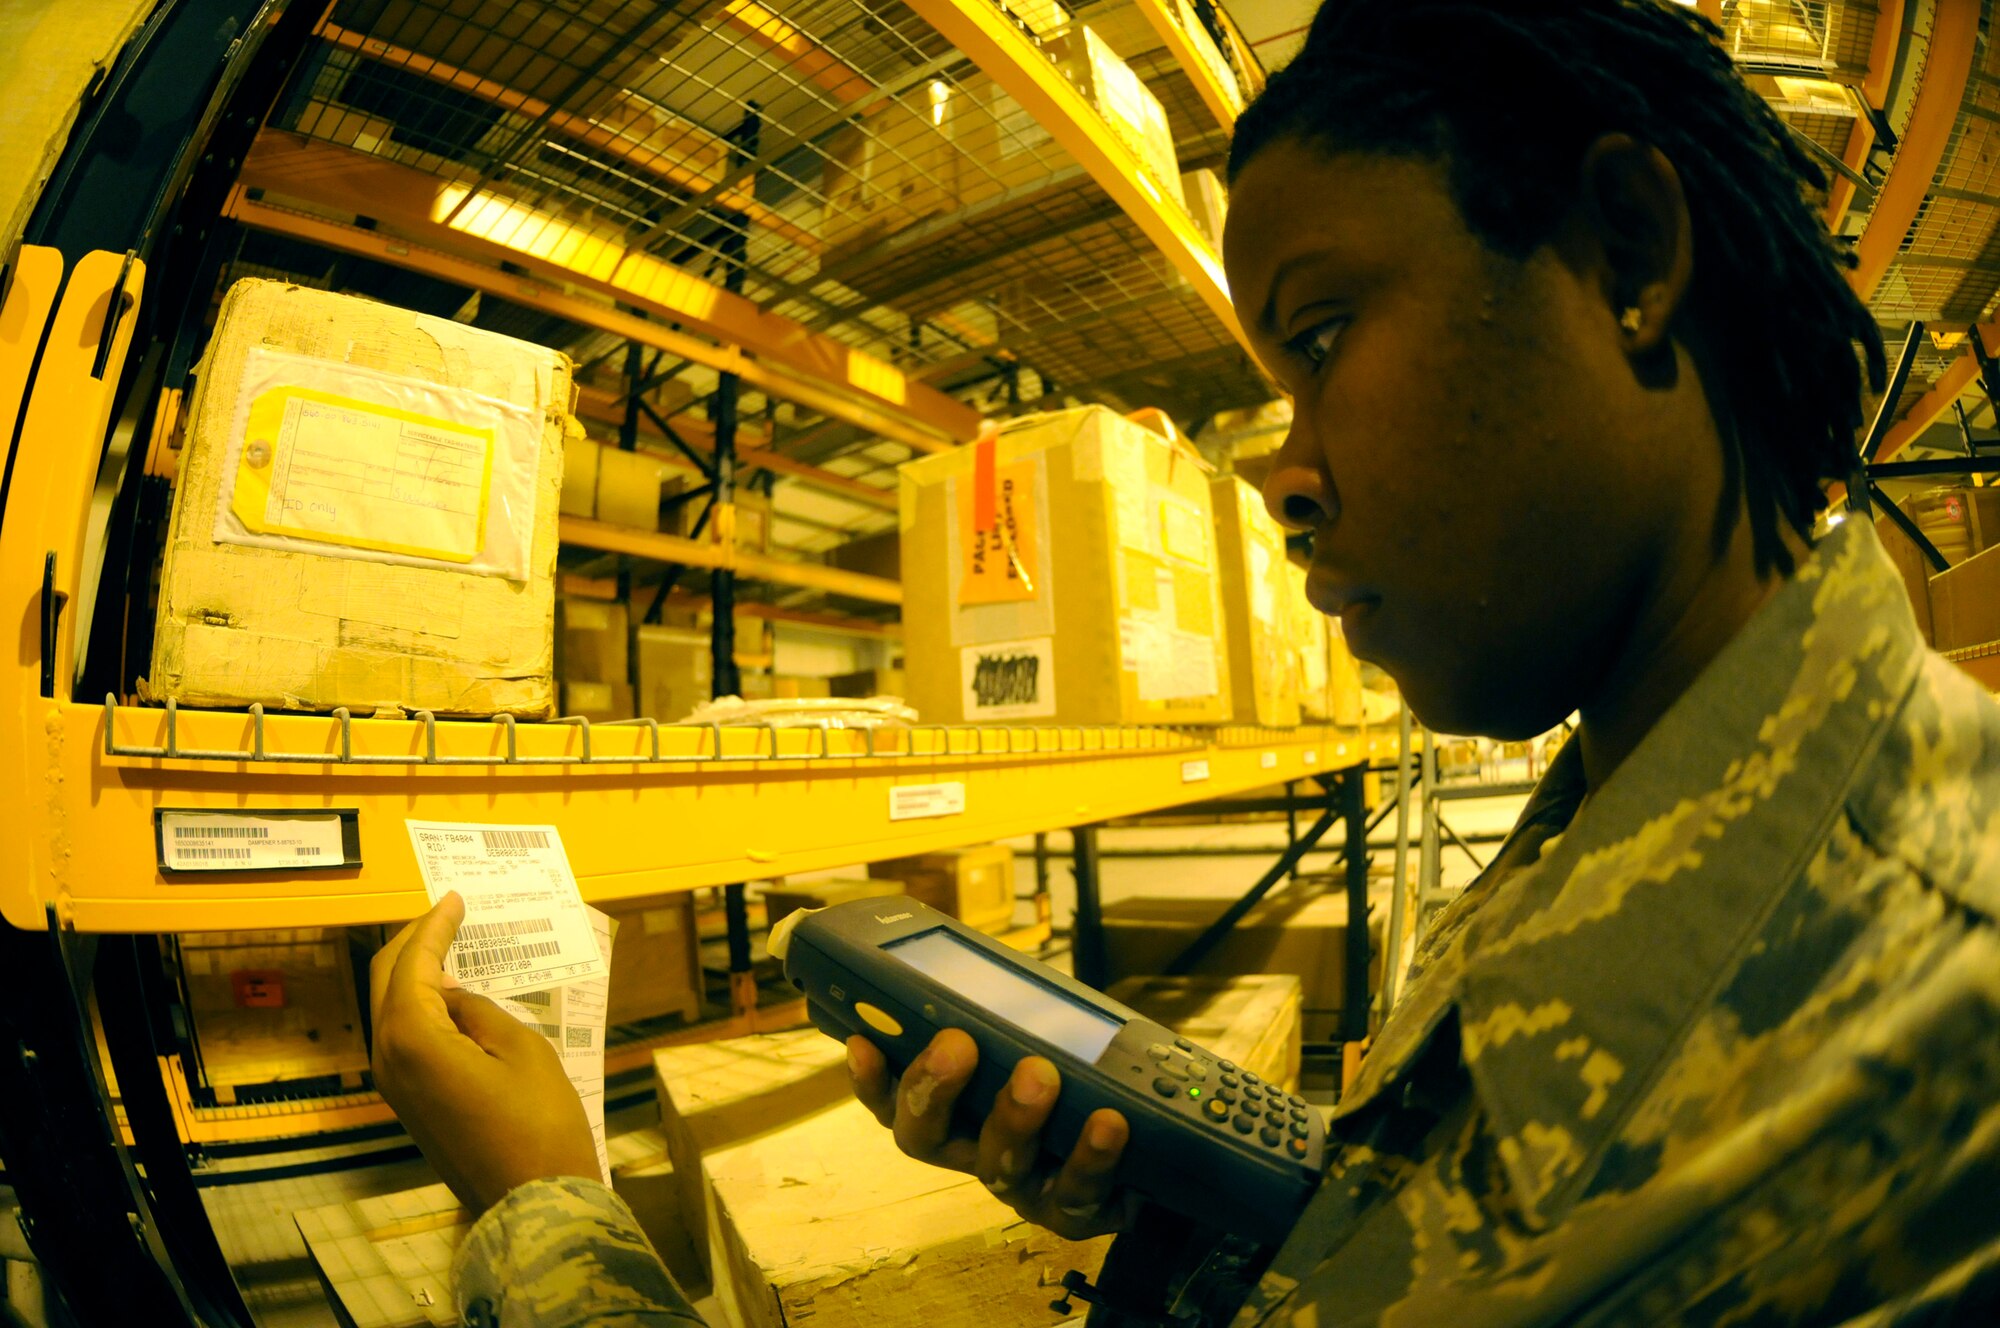 Senior Airmen Kendra Bossard, consolidated aircraft parts store journeyman assigned to the 379th Expeditionary Logistics Readiness Squadron, uses a supply asset tracking system gun to scan labels to maintain accountability of their inventory items Nov. 6, at an undisclosed air base in Southwest Asia.  Airman Bossard, a native of Sumter, S.C., is deployed from Langley Air Force Base, Va., in support of Operations Iraqi and Enduring Freedom and Joint Task Force-Horn of Africa. (U.S. Air Force photo by Staff Sgt. Darnell T. Cannady/Released)